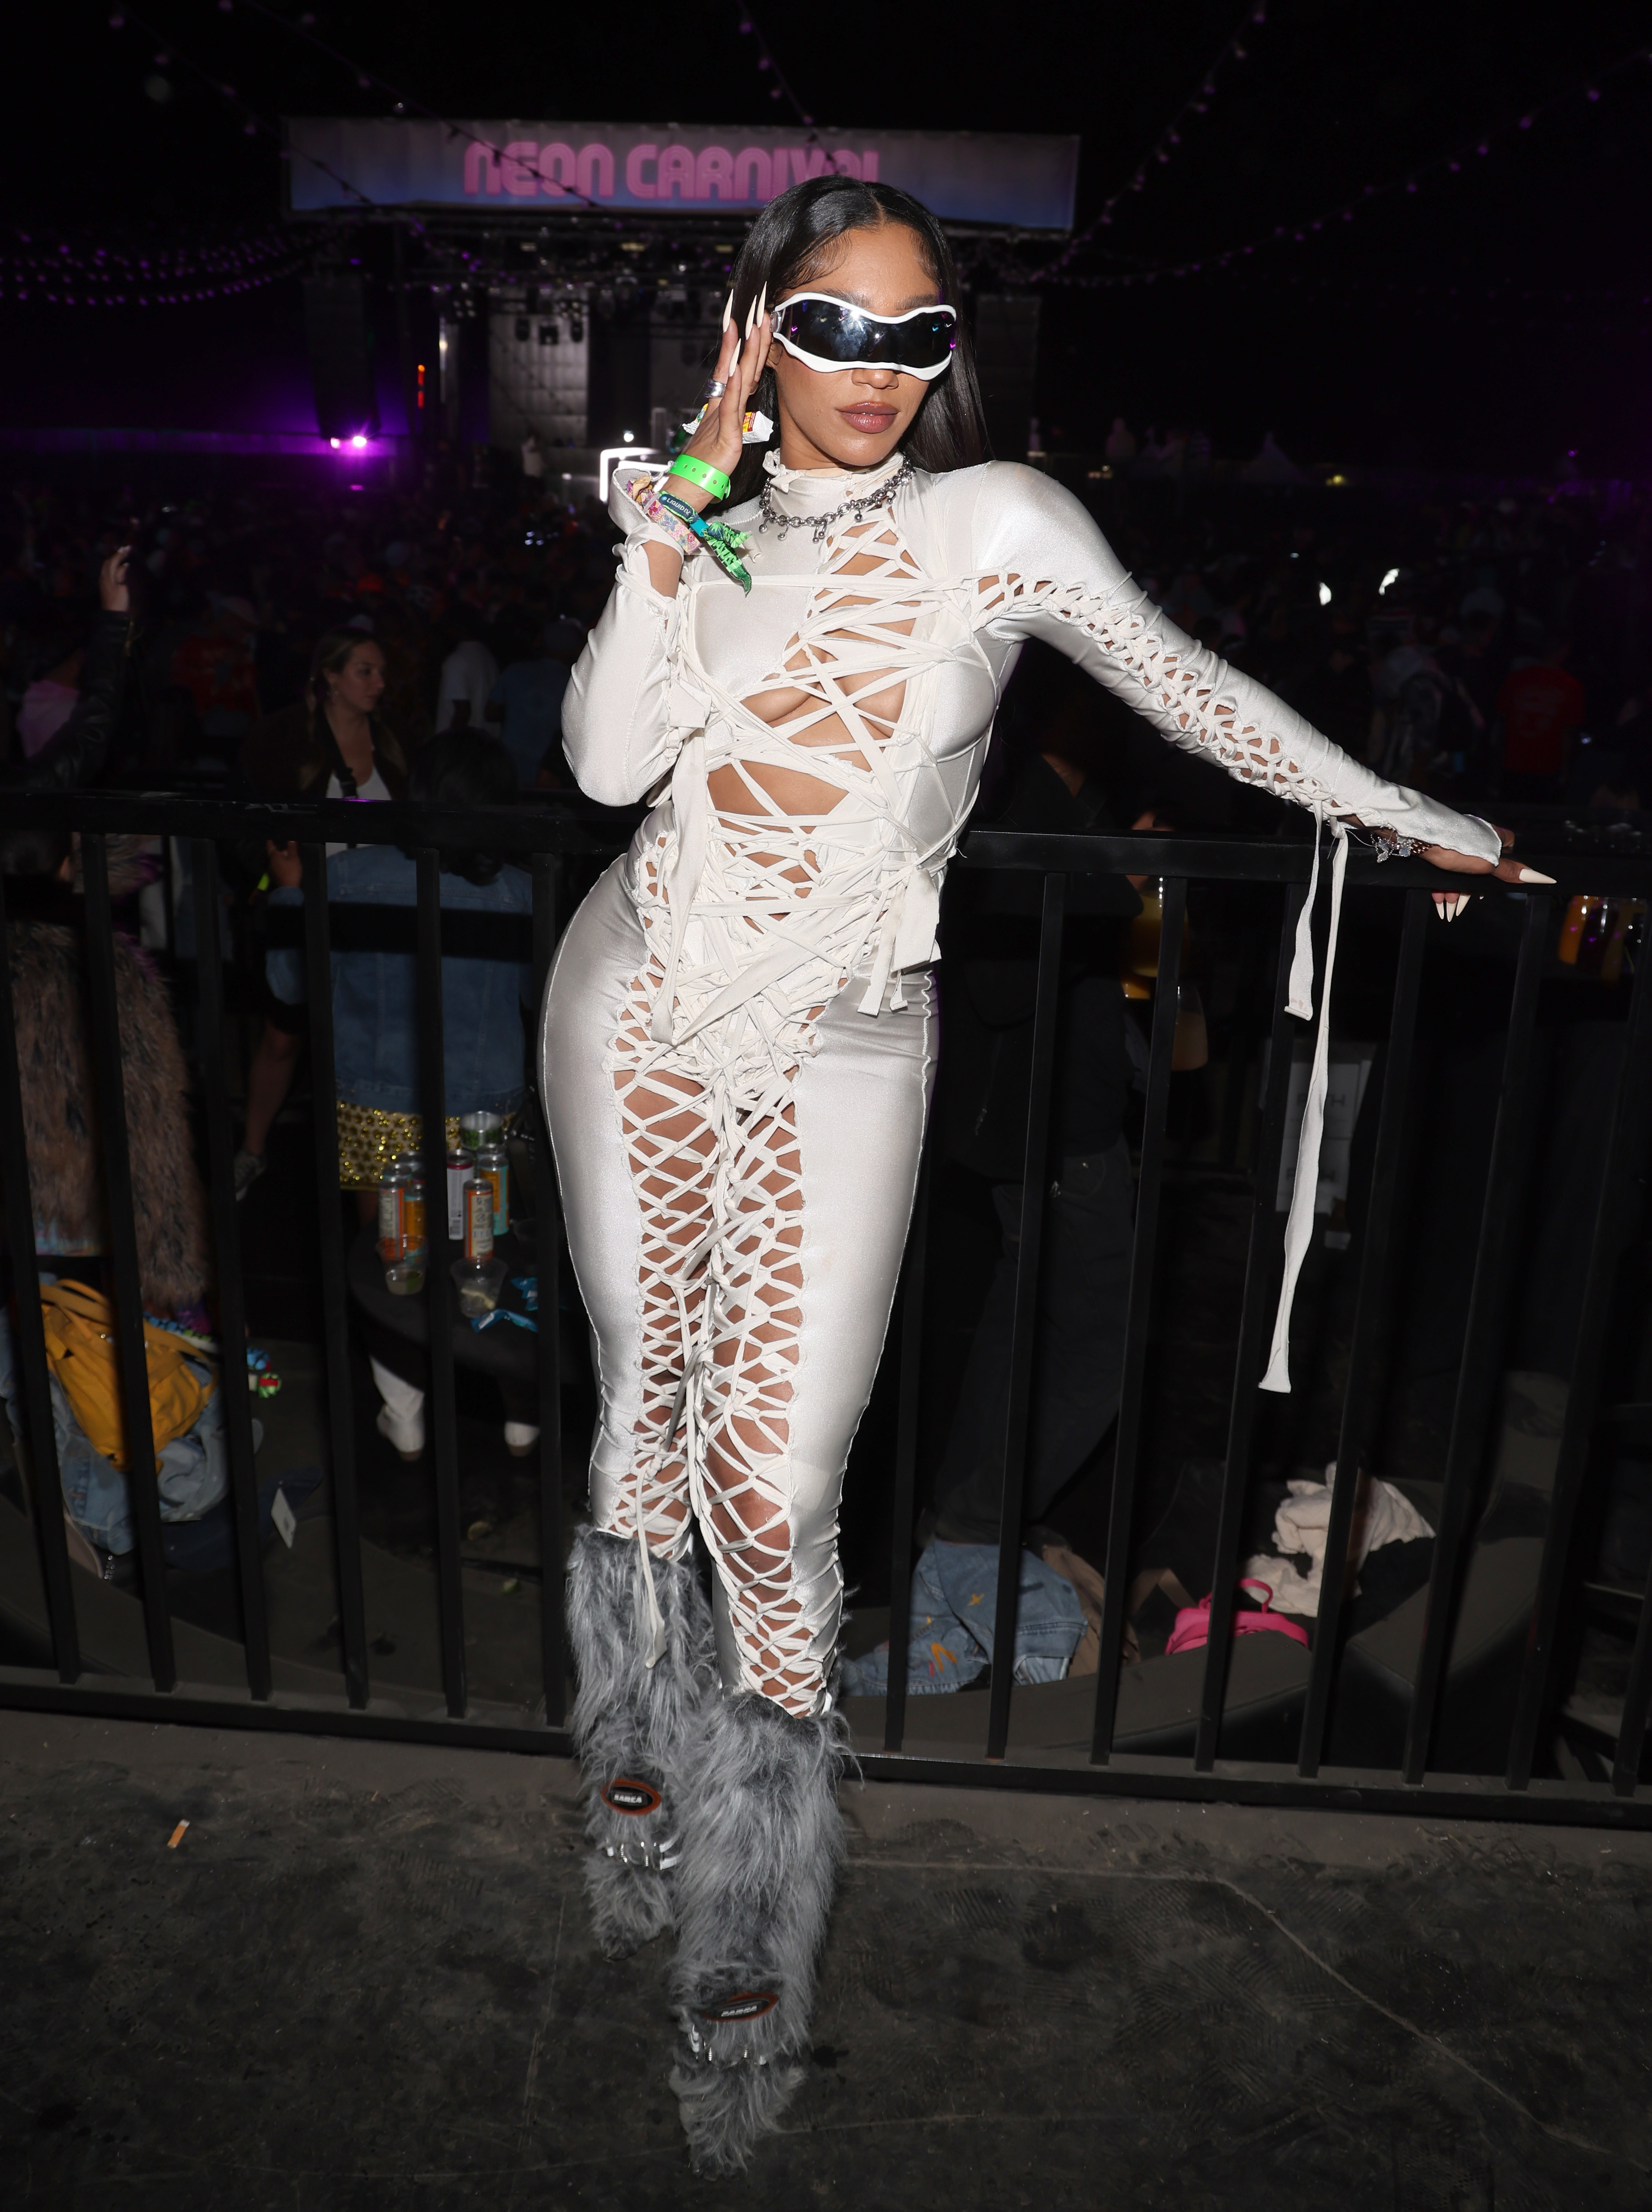 Celebrity in a white cut-out jumpsuit with feather details, standing at an event, wearing sunglasses and holding a drink